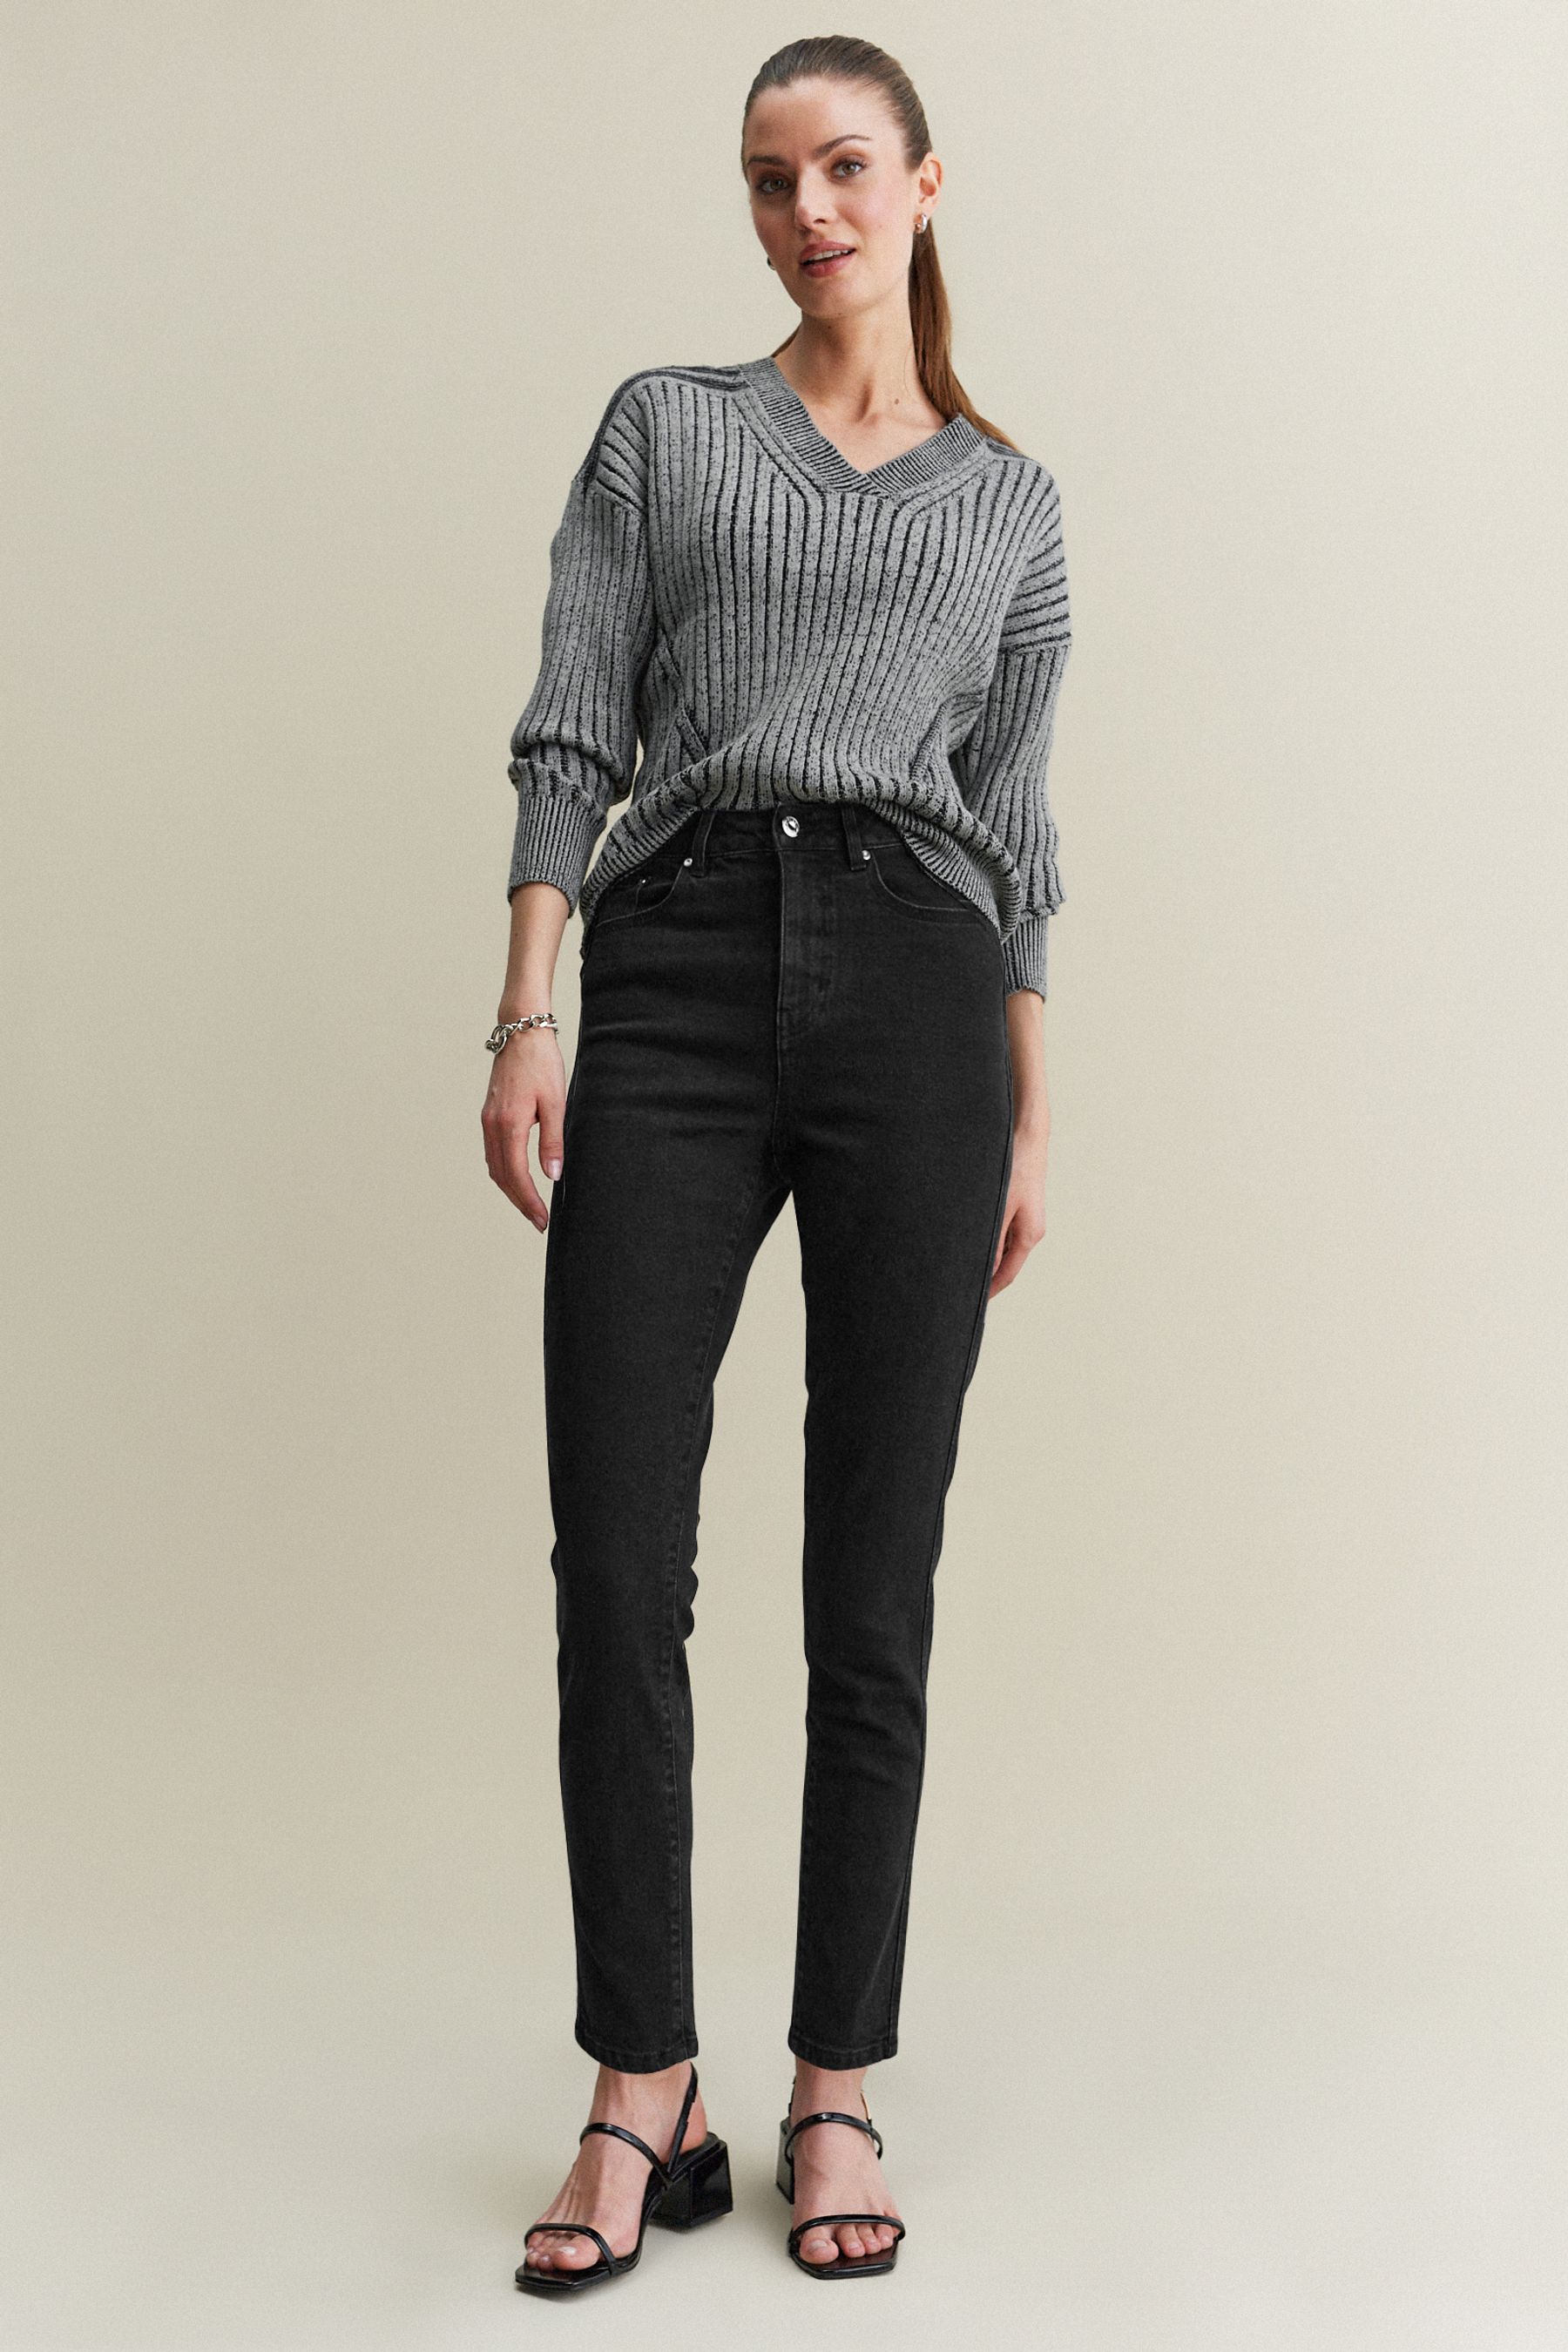 Buy Black Mom Comfort Stretch Jeans from the Next UK online shop